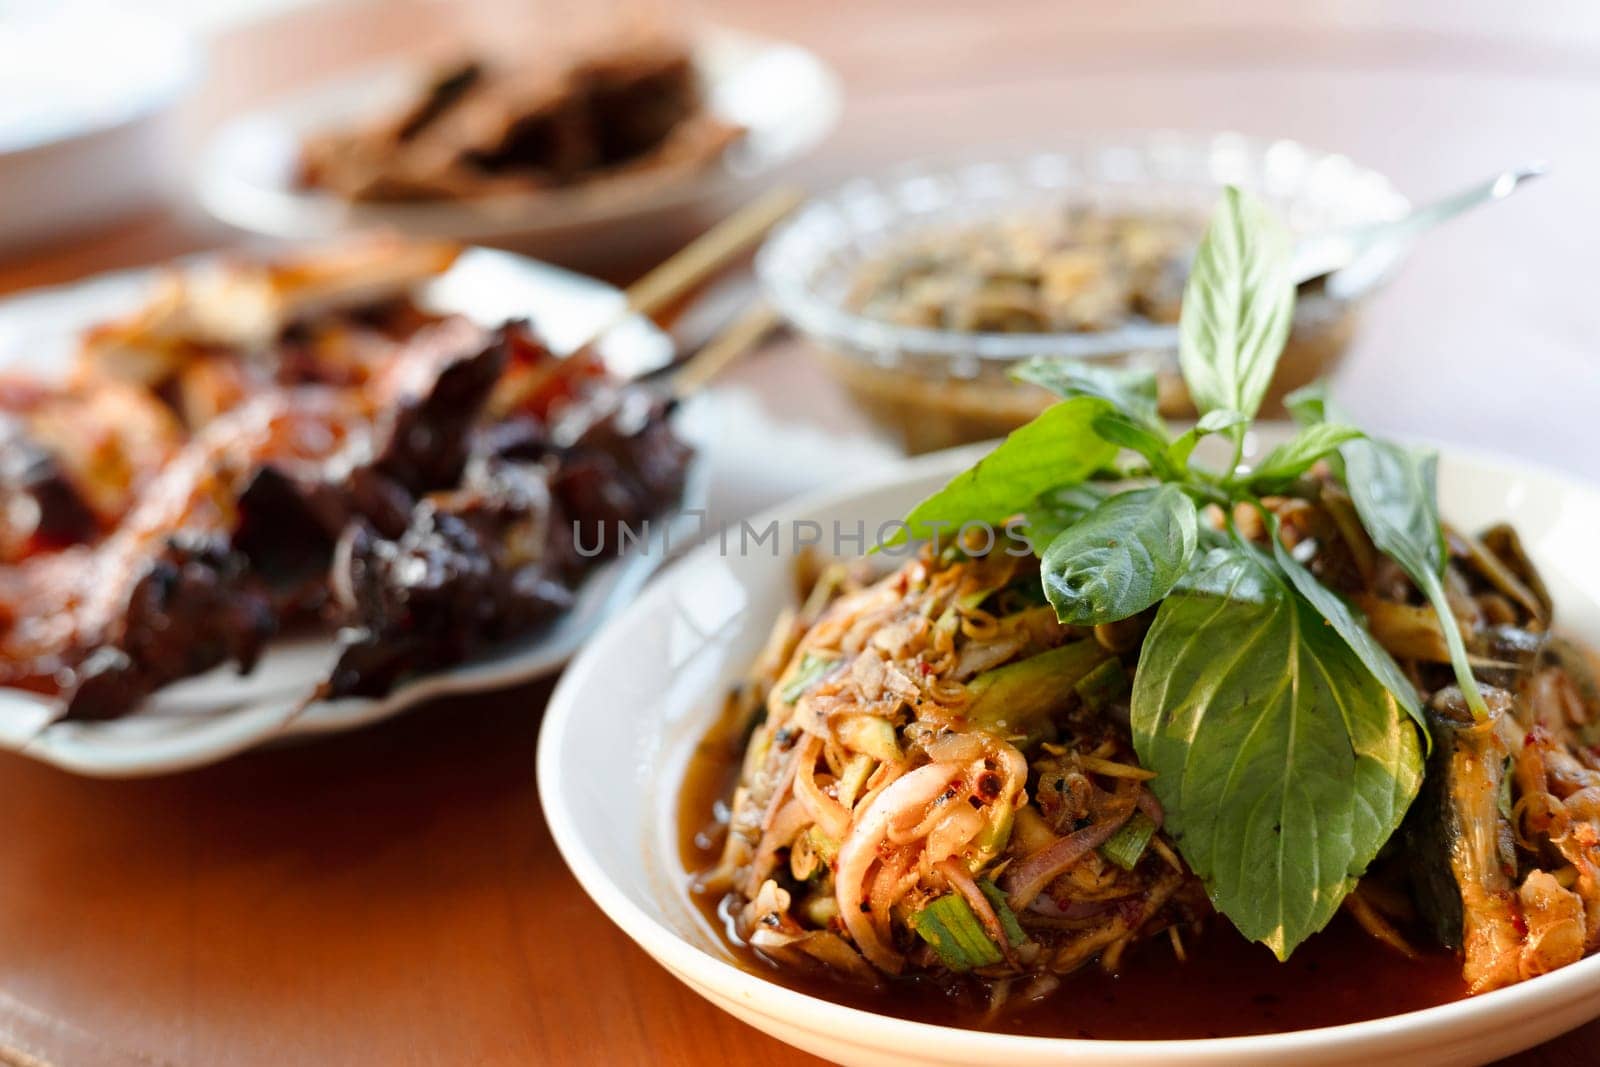 Local Thai food for people in the central region of Thailand. Spicy frog salad with vegetables and herbs. grilled chicken.